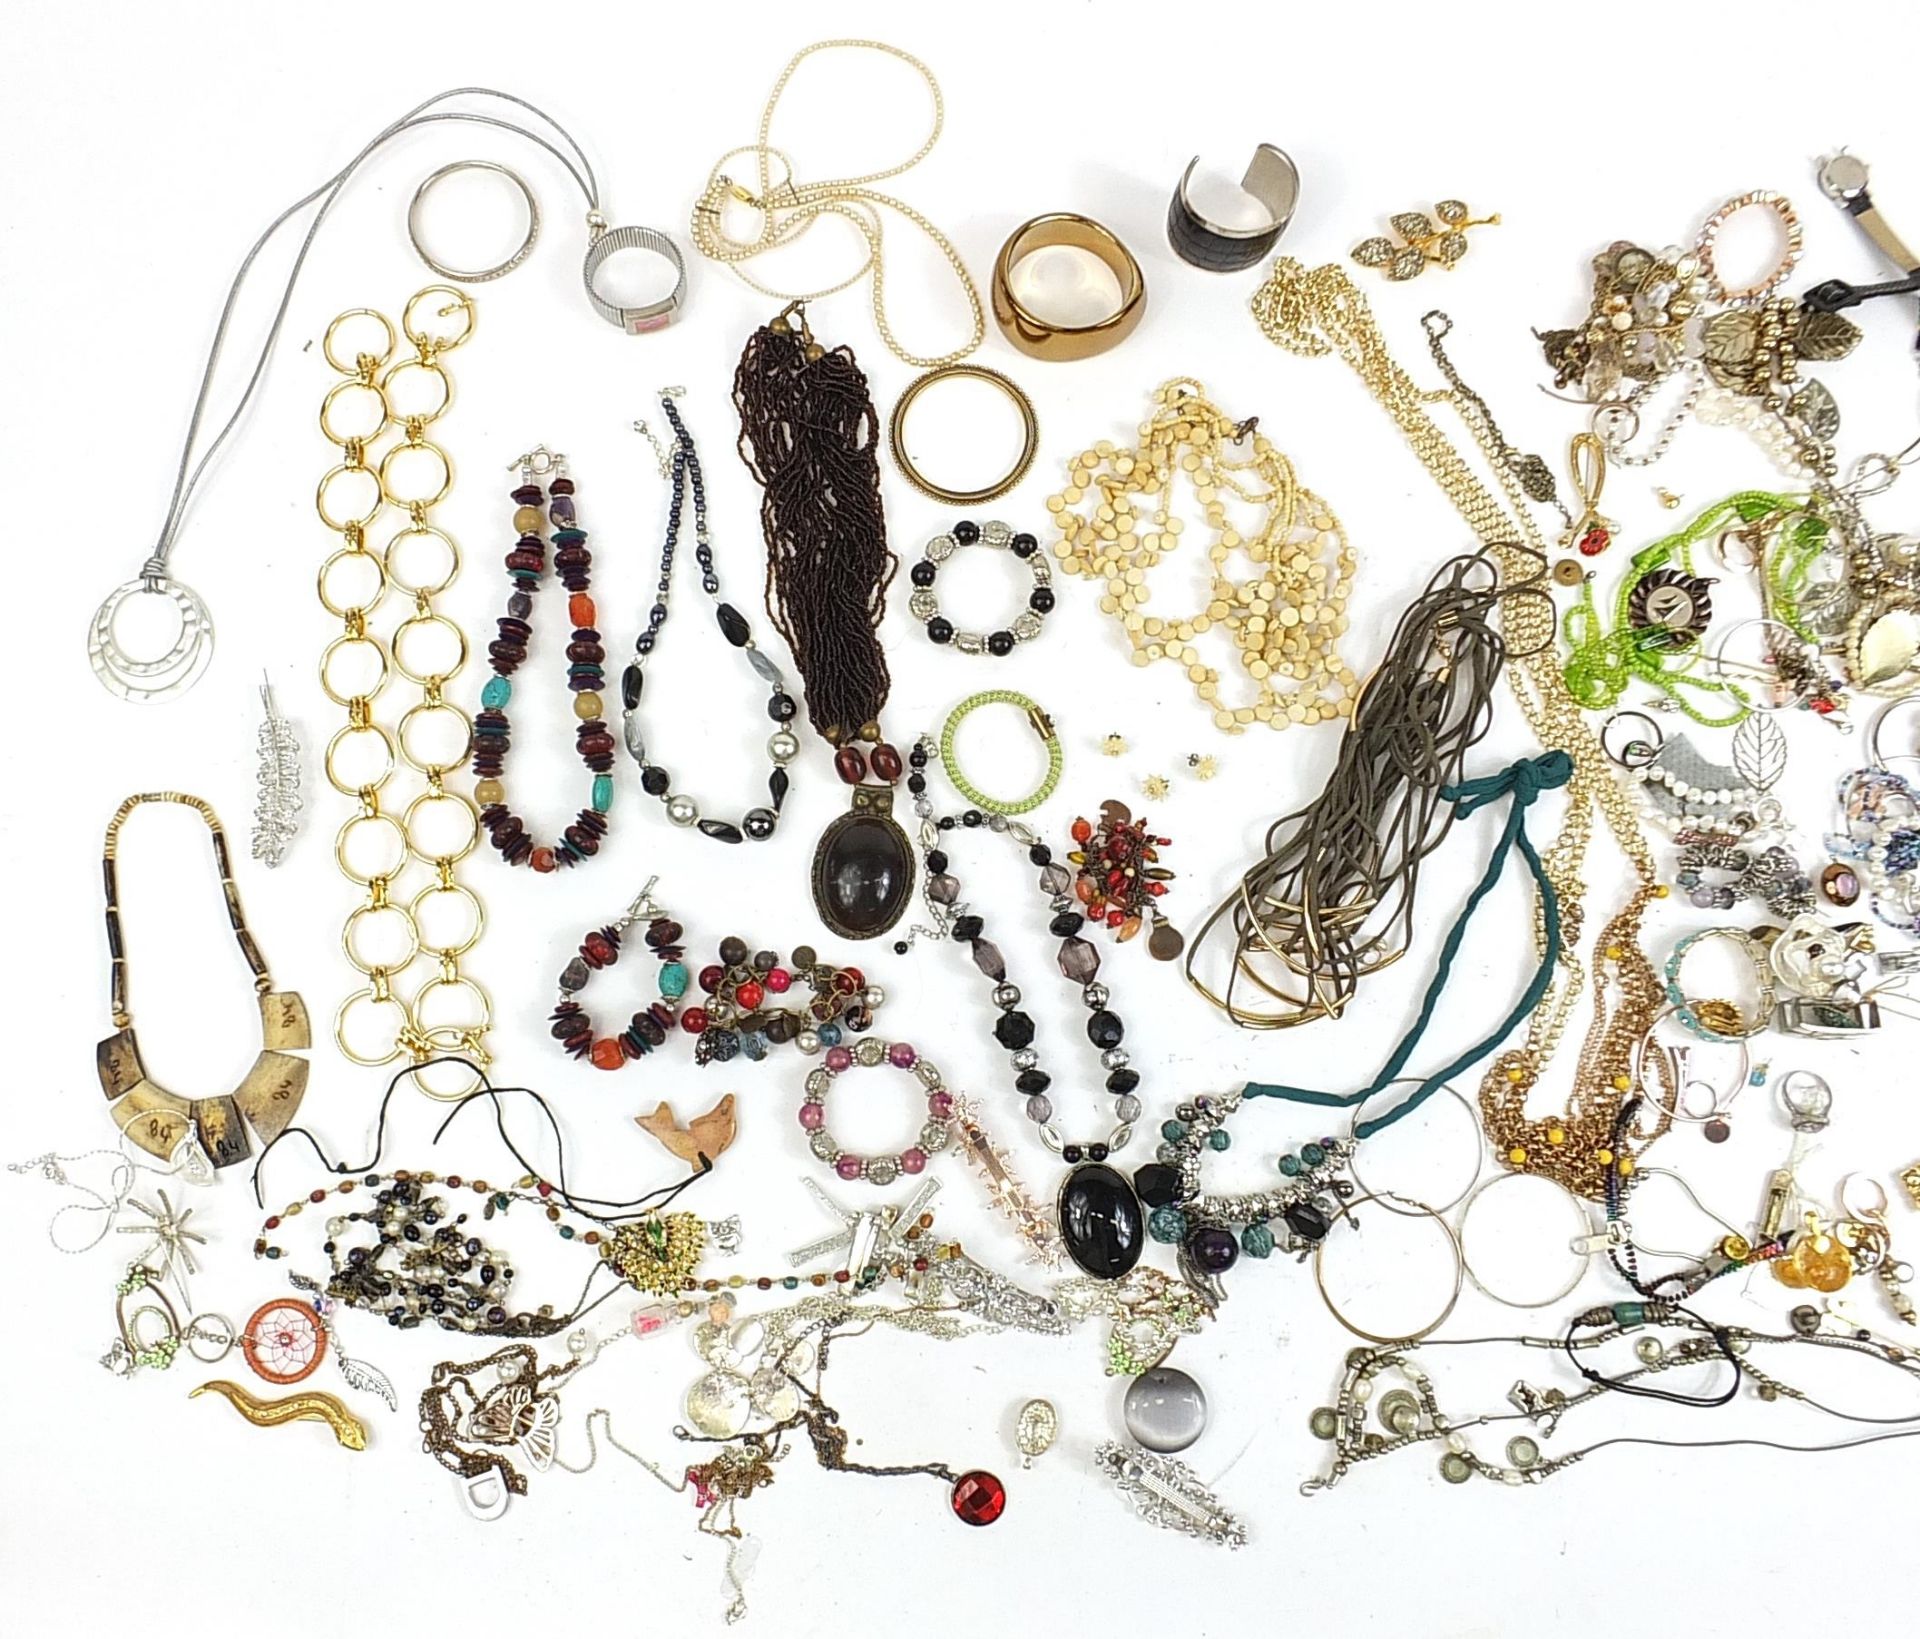 Vintage and later costume jewellery including brooches, necklaces, bracelets and cufflinks - Image 2 of 3